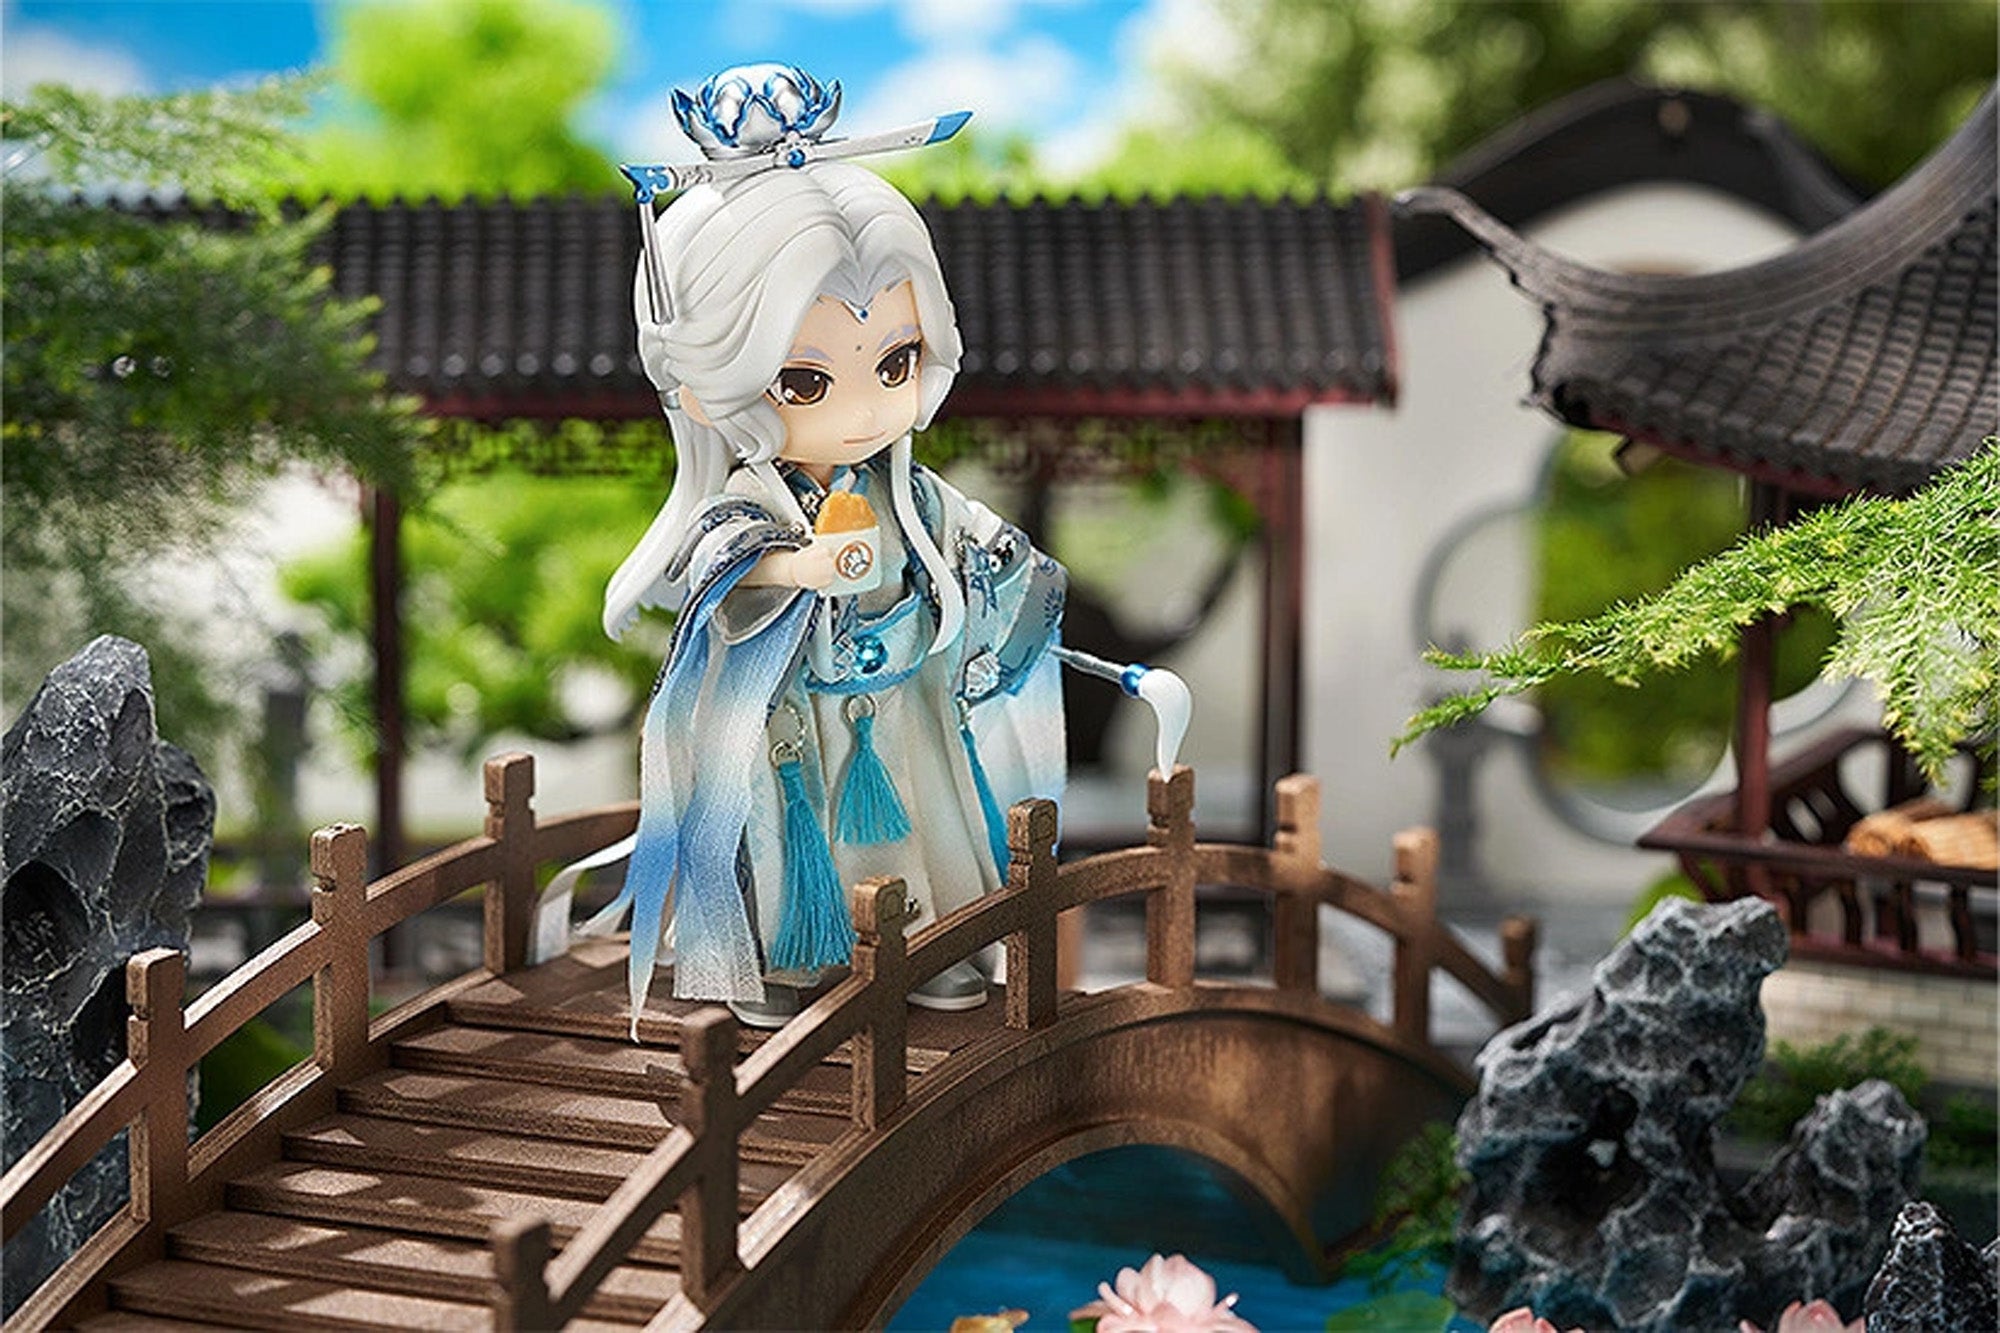 Nendoroid Doll - Pili Xia Ying 霹靂俠影 - Su Huan-Jen (Contest of the Endless Battle Ver.) - Marvelous Toys